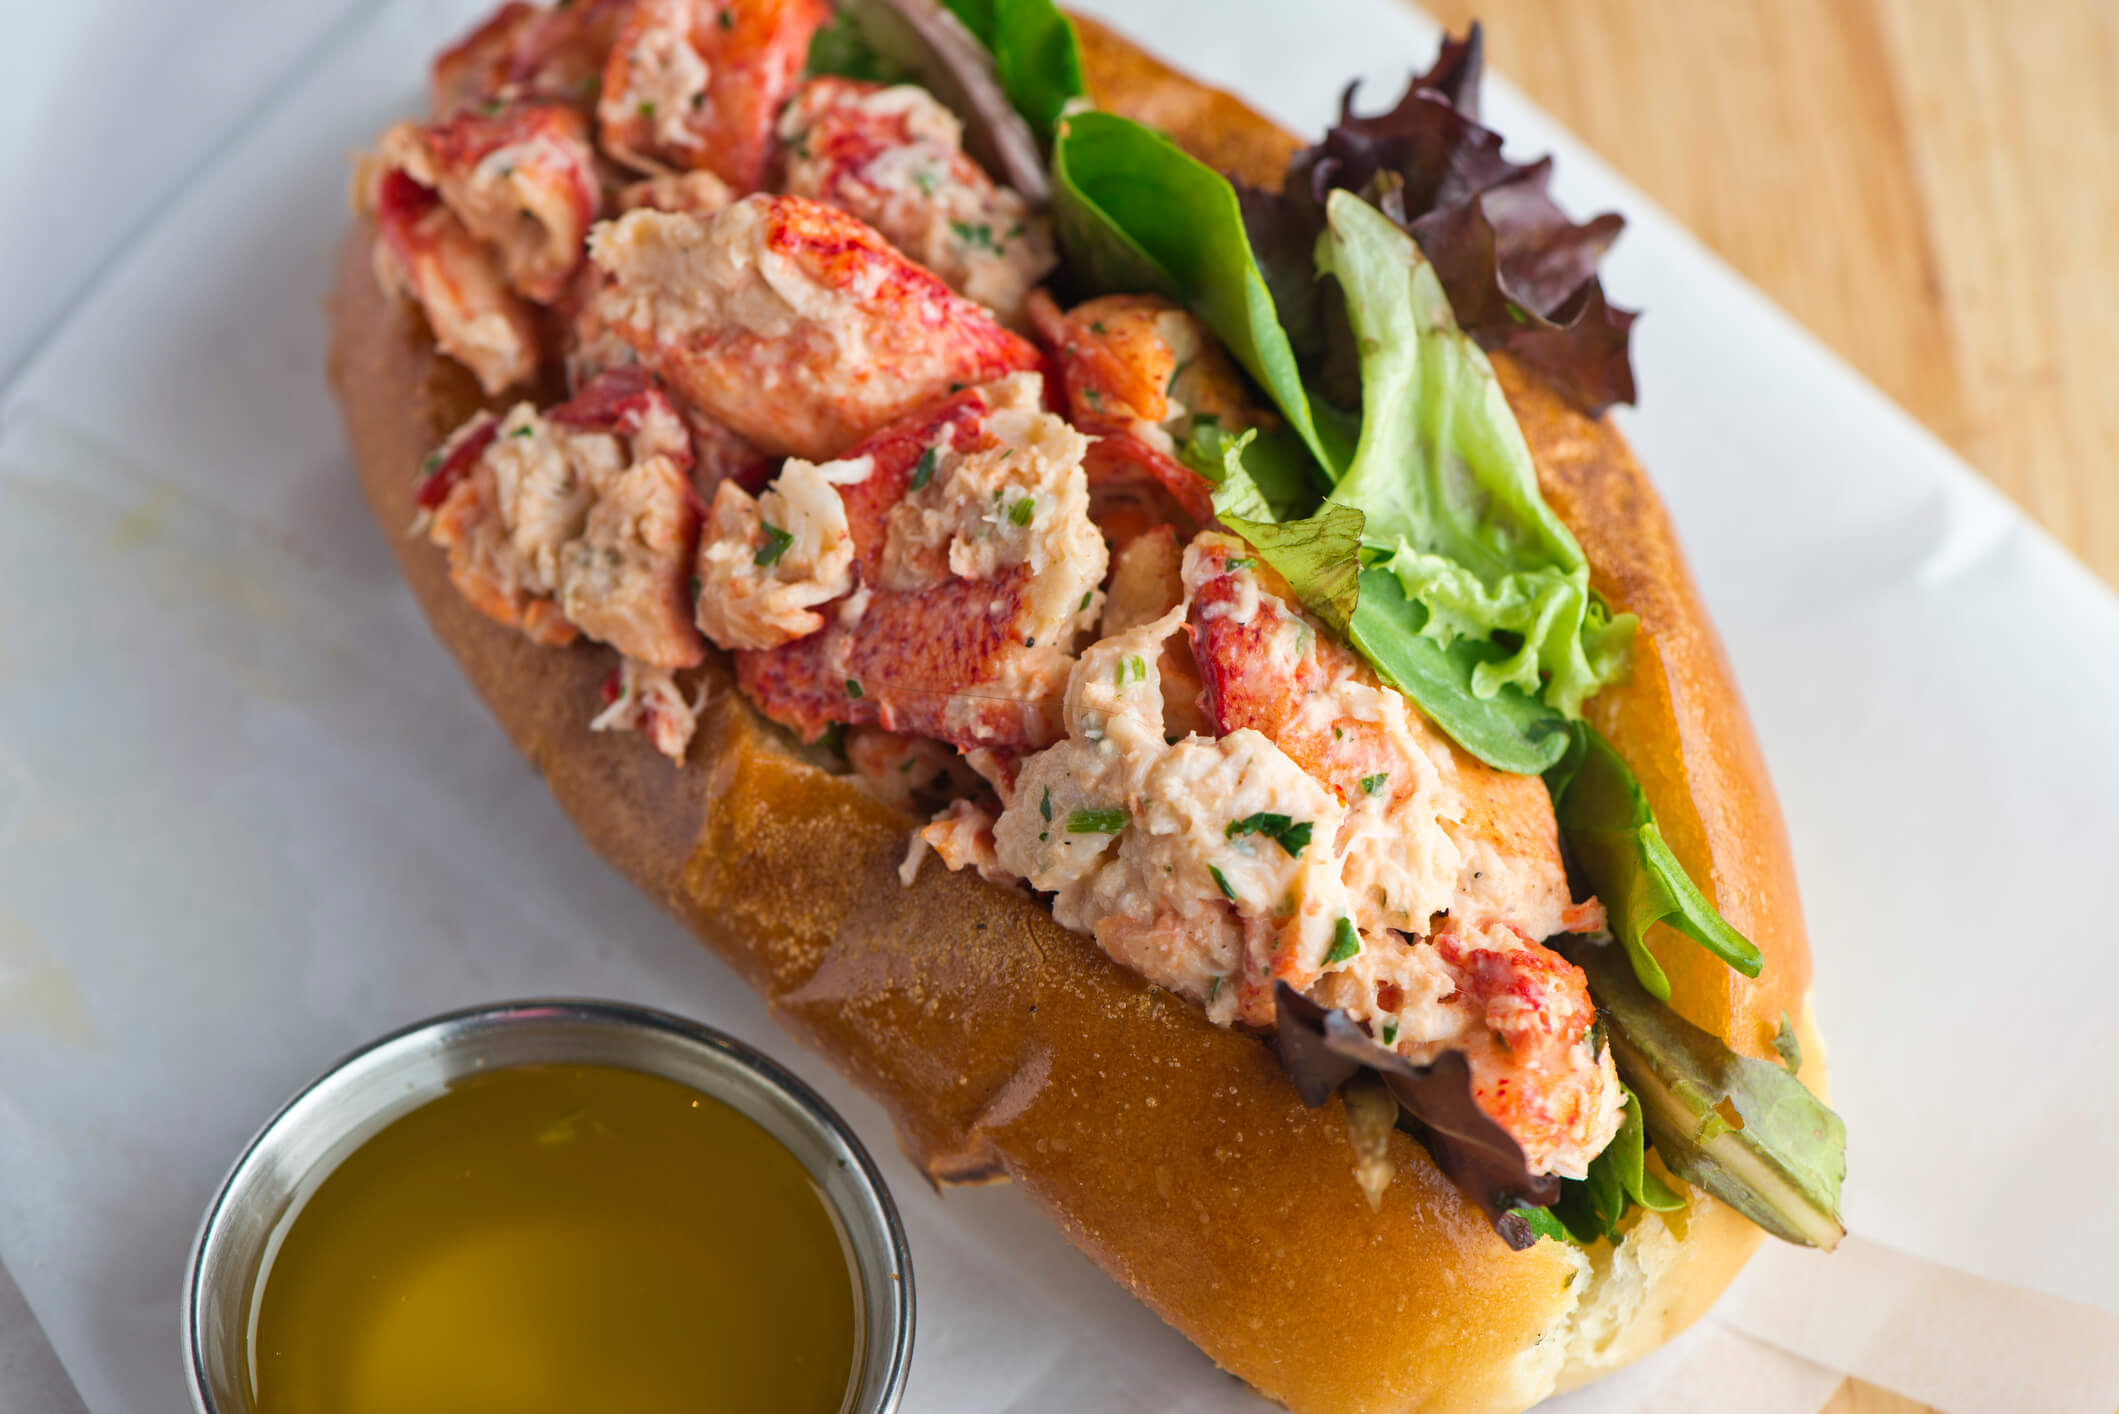 A buttery, delicious lobster roll